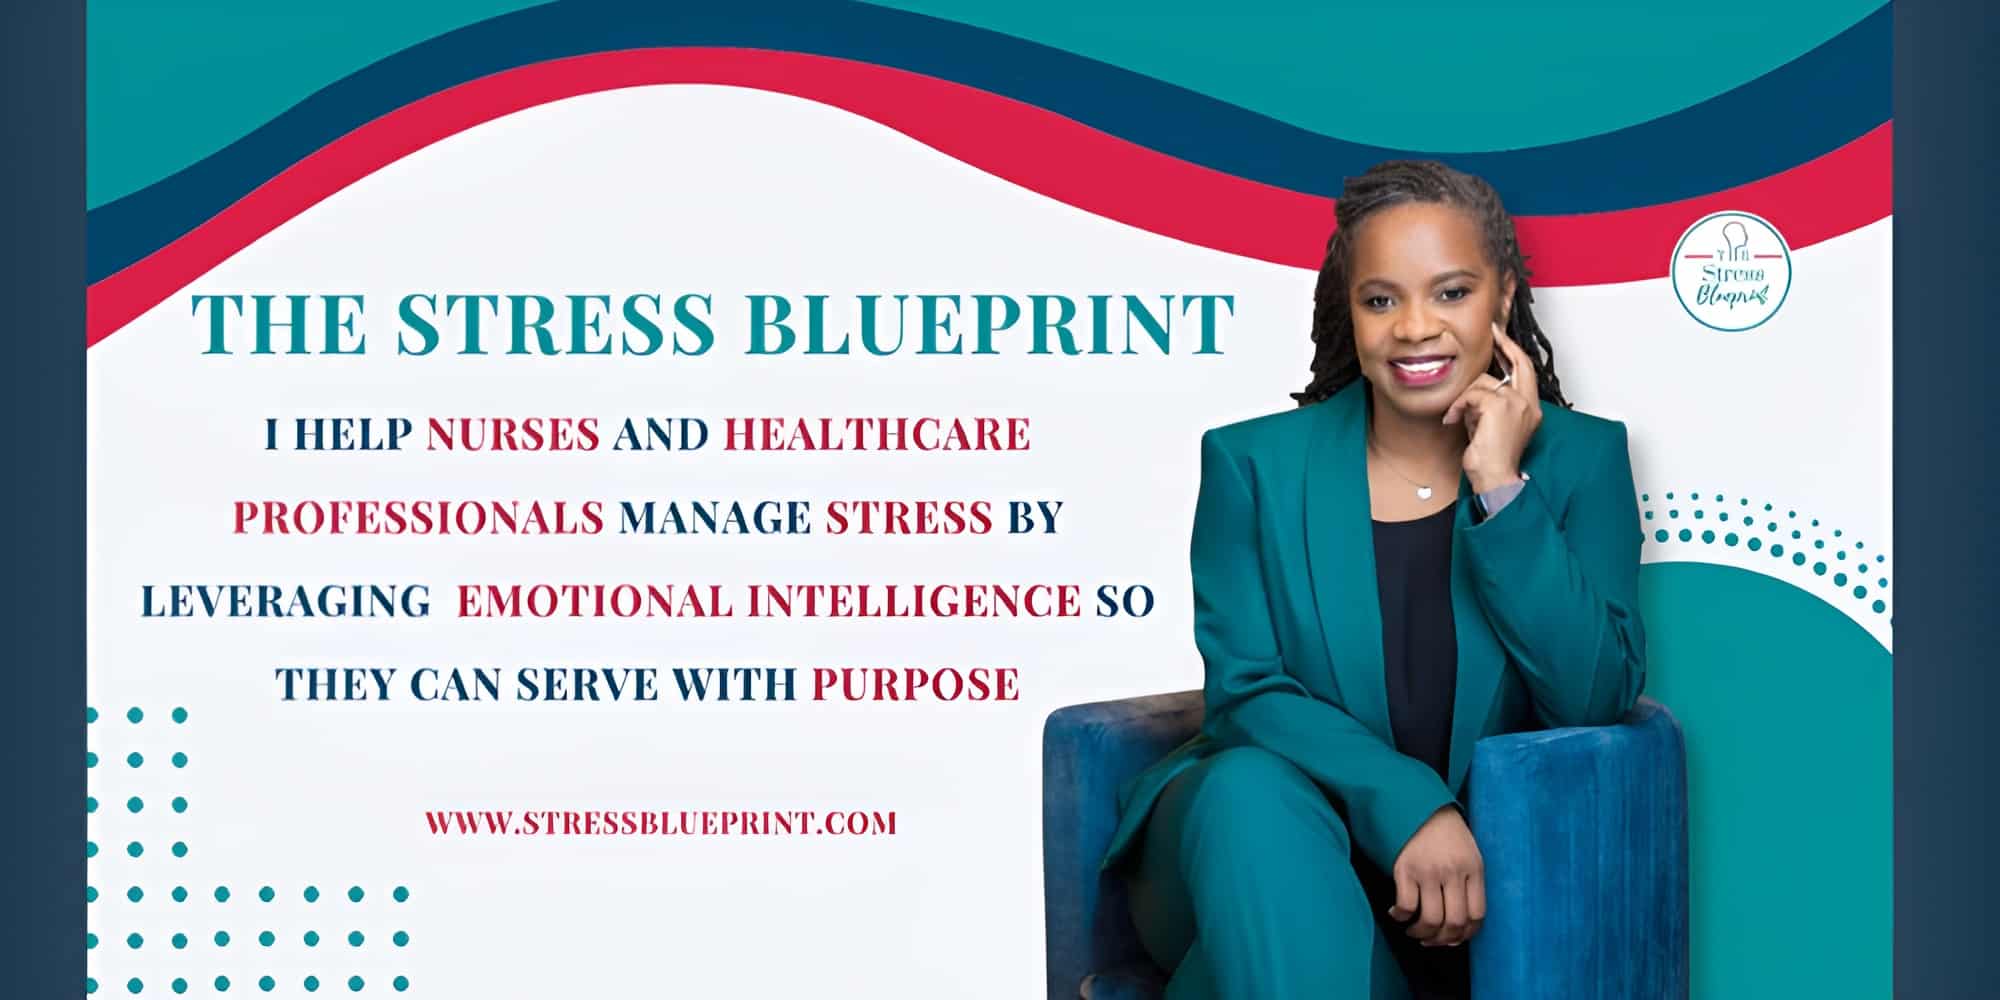 Wendy Garvin Mayo, author of SHAPE Your Life: 5-Step Blueprint for Sustainable Stress Management